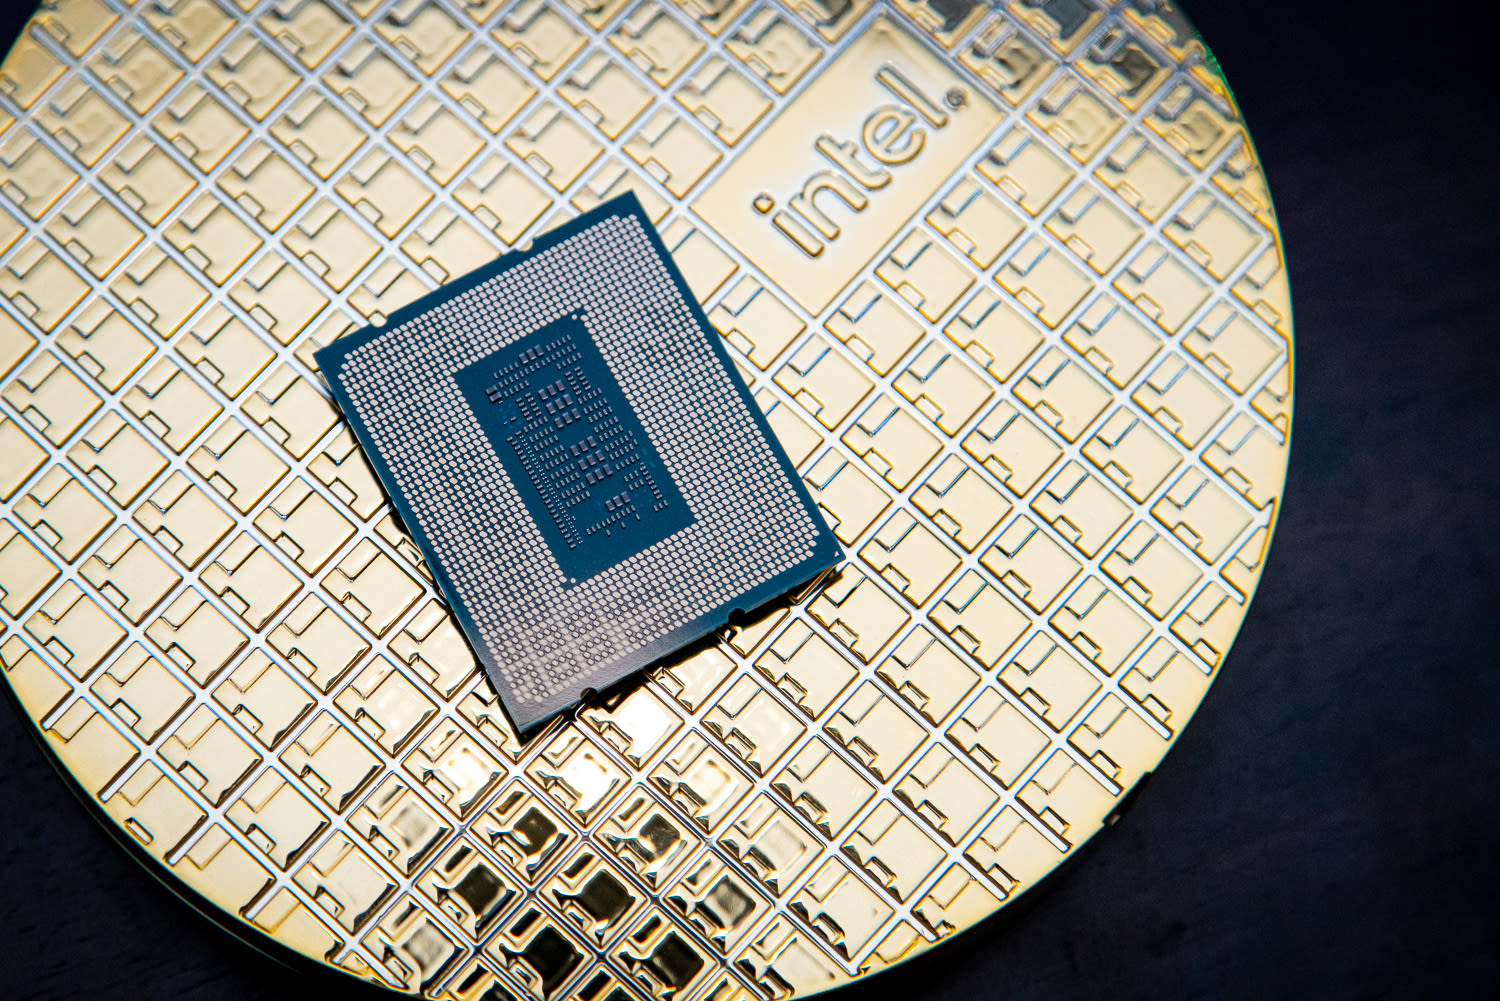 Intel’s next-gen CPUs are leaving a big feature behind